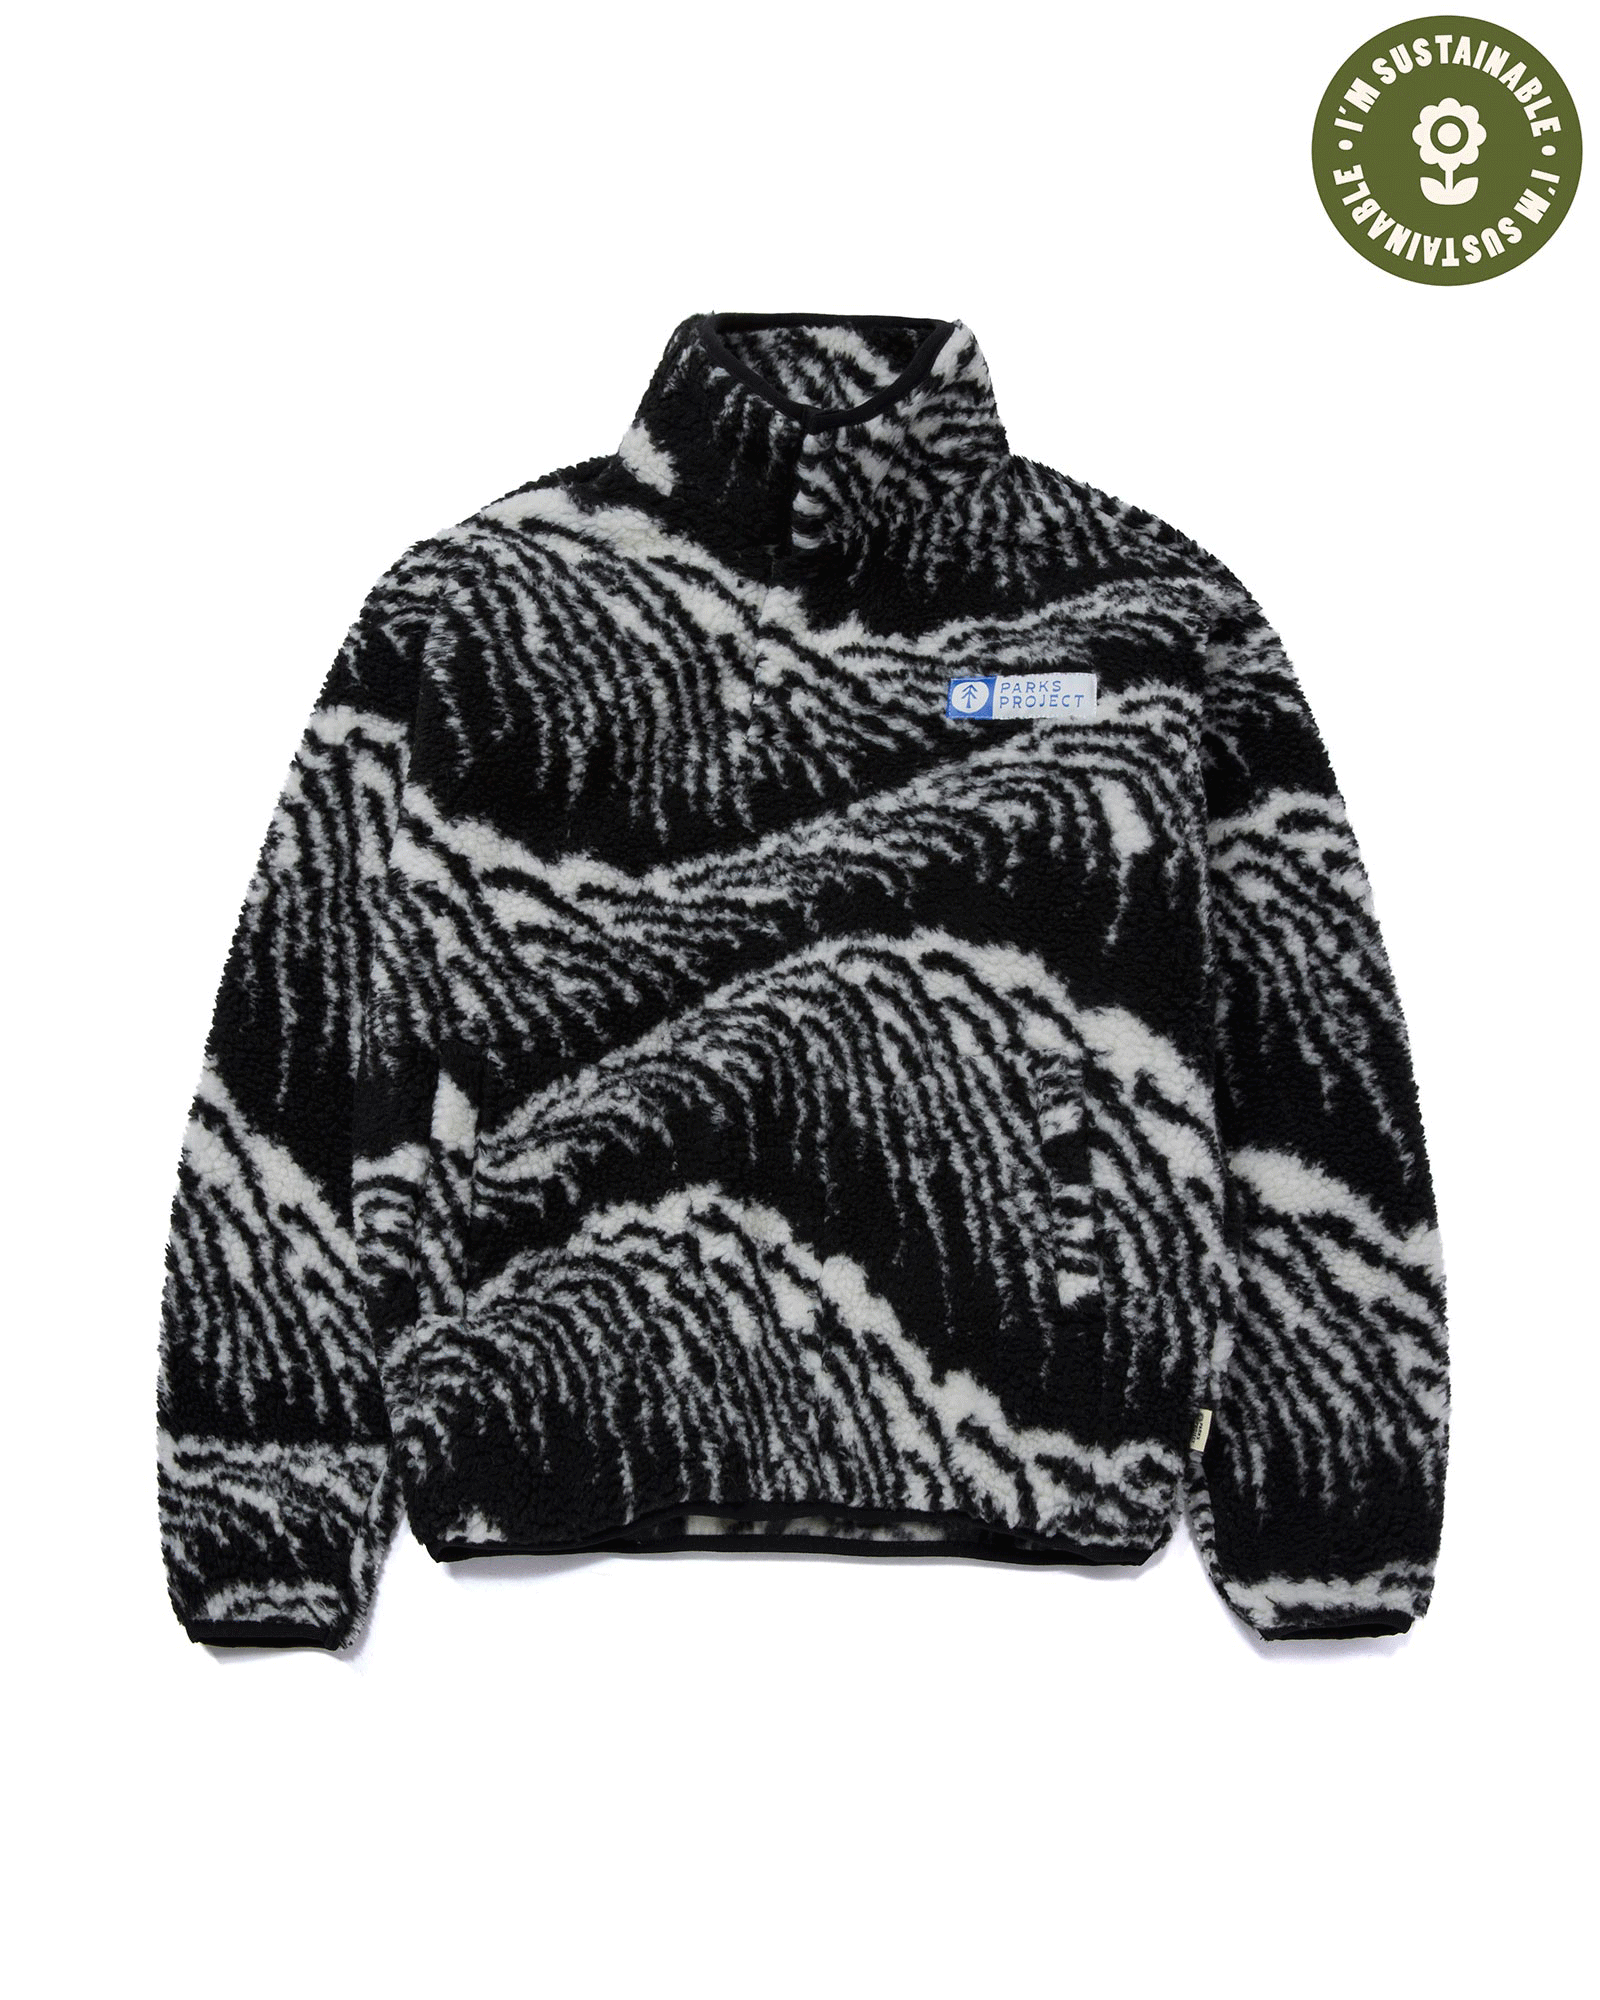 Shop Acadia Waves Trail High Pile Fleece Inspired by Acadia – Parks Project